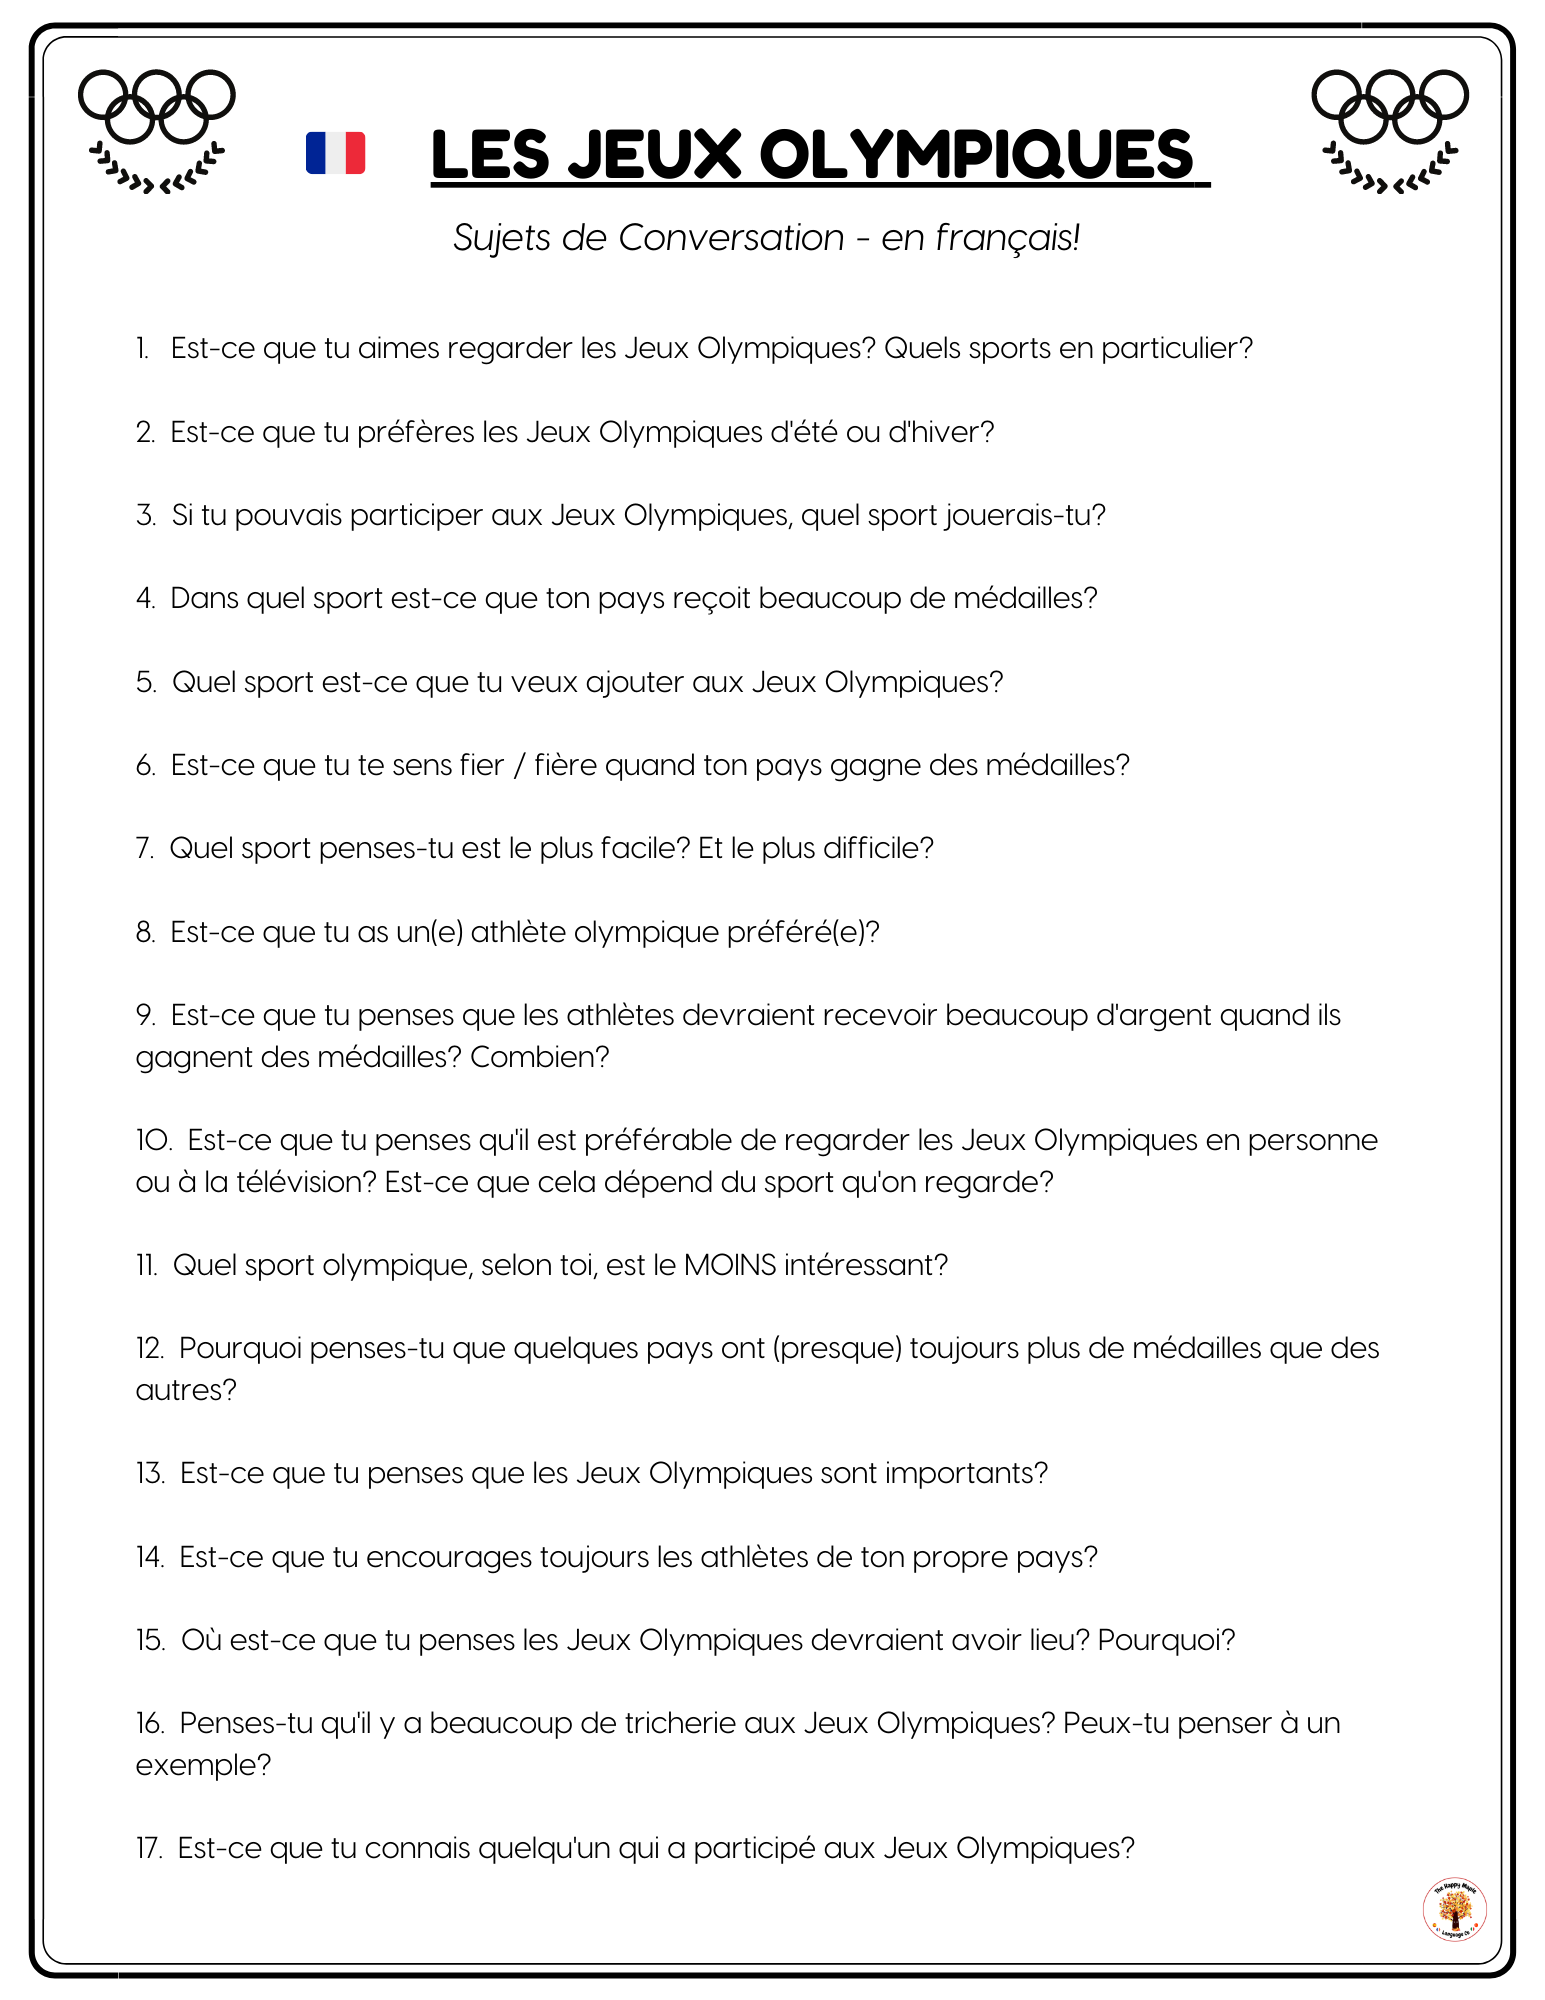 French Discussion Questions - Les Jeux Olympiques / Olympic Games Free Printable Download